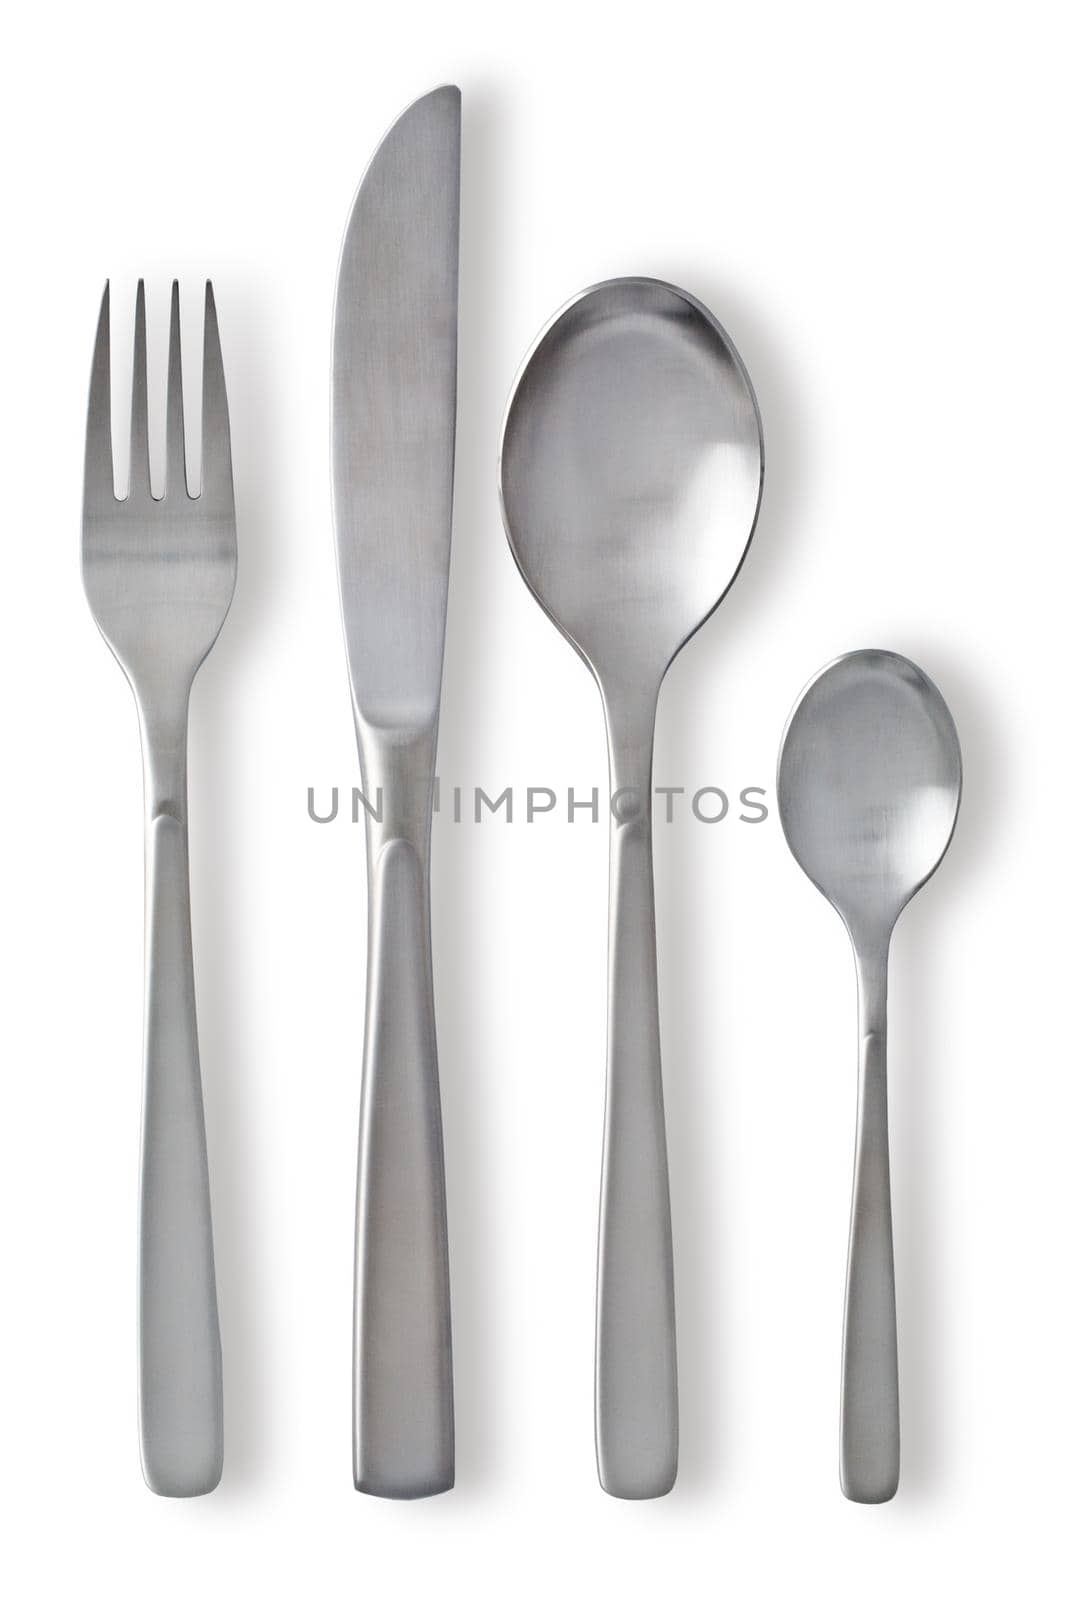 Cutlery set with Fork, Knife and Spoon by kornienko